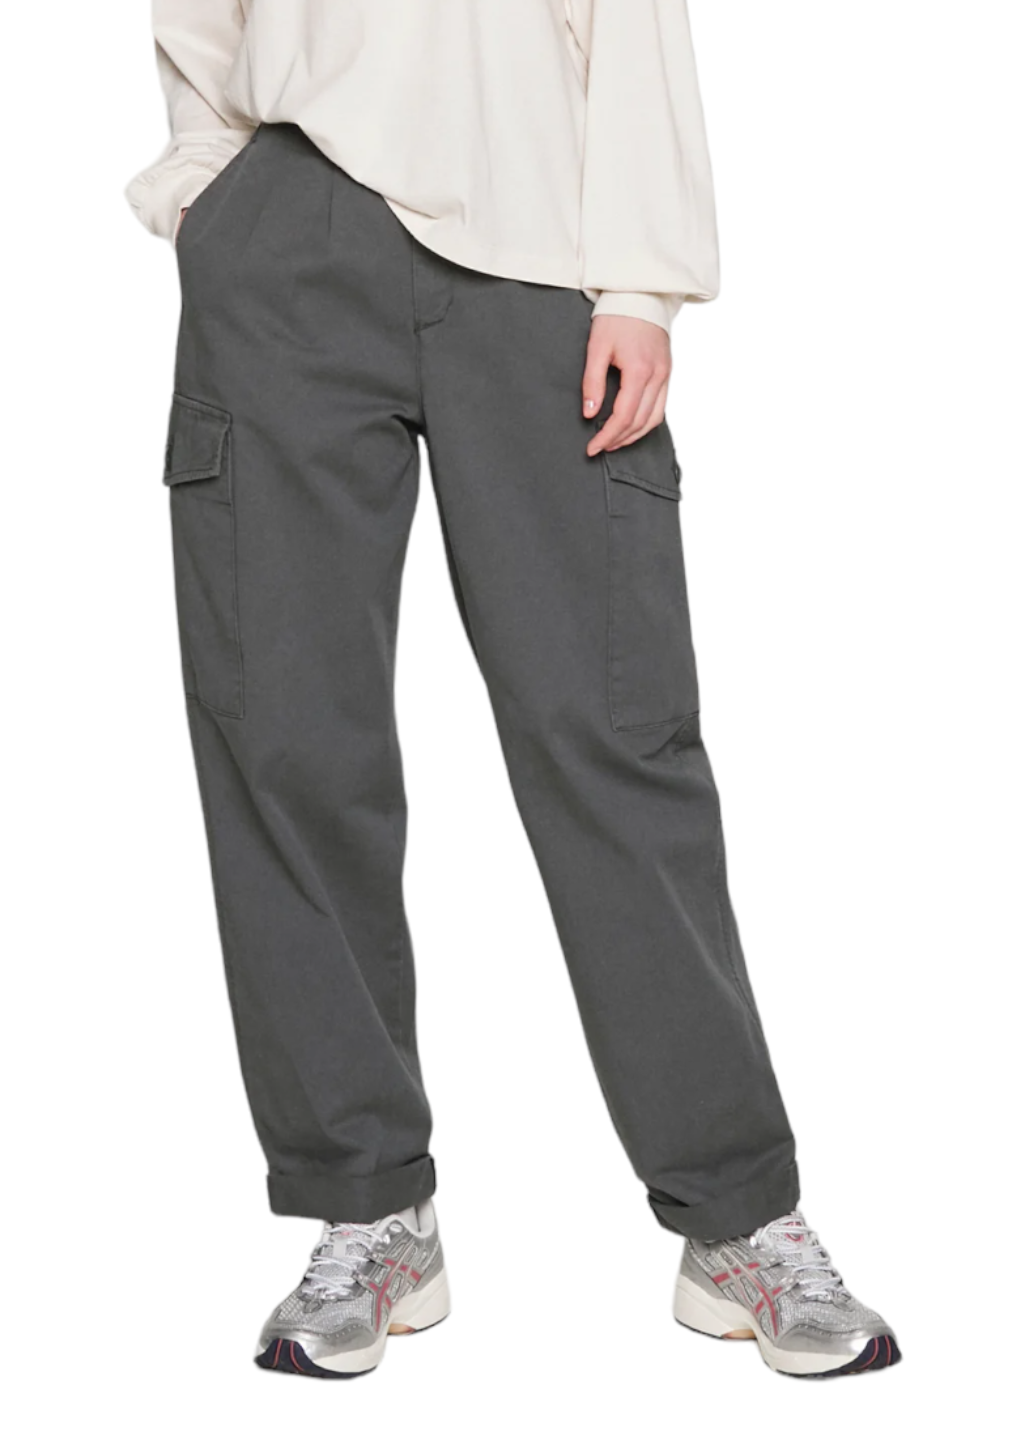 CARHARTT WIP WOMEN COLLINS PANT I029789 WALL Size W 25 L 00 Color Wall